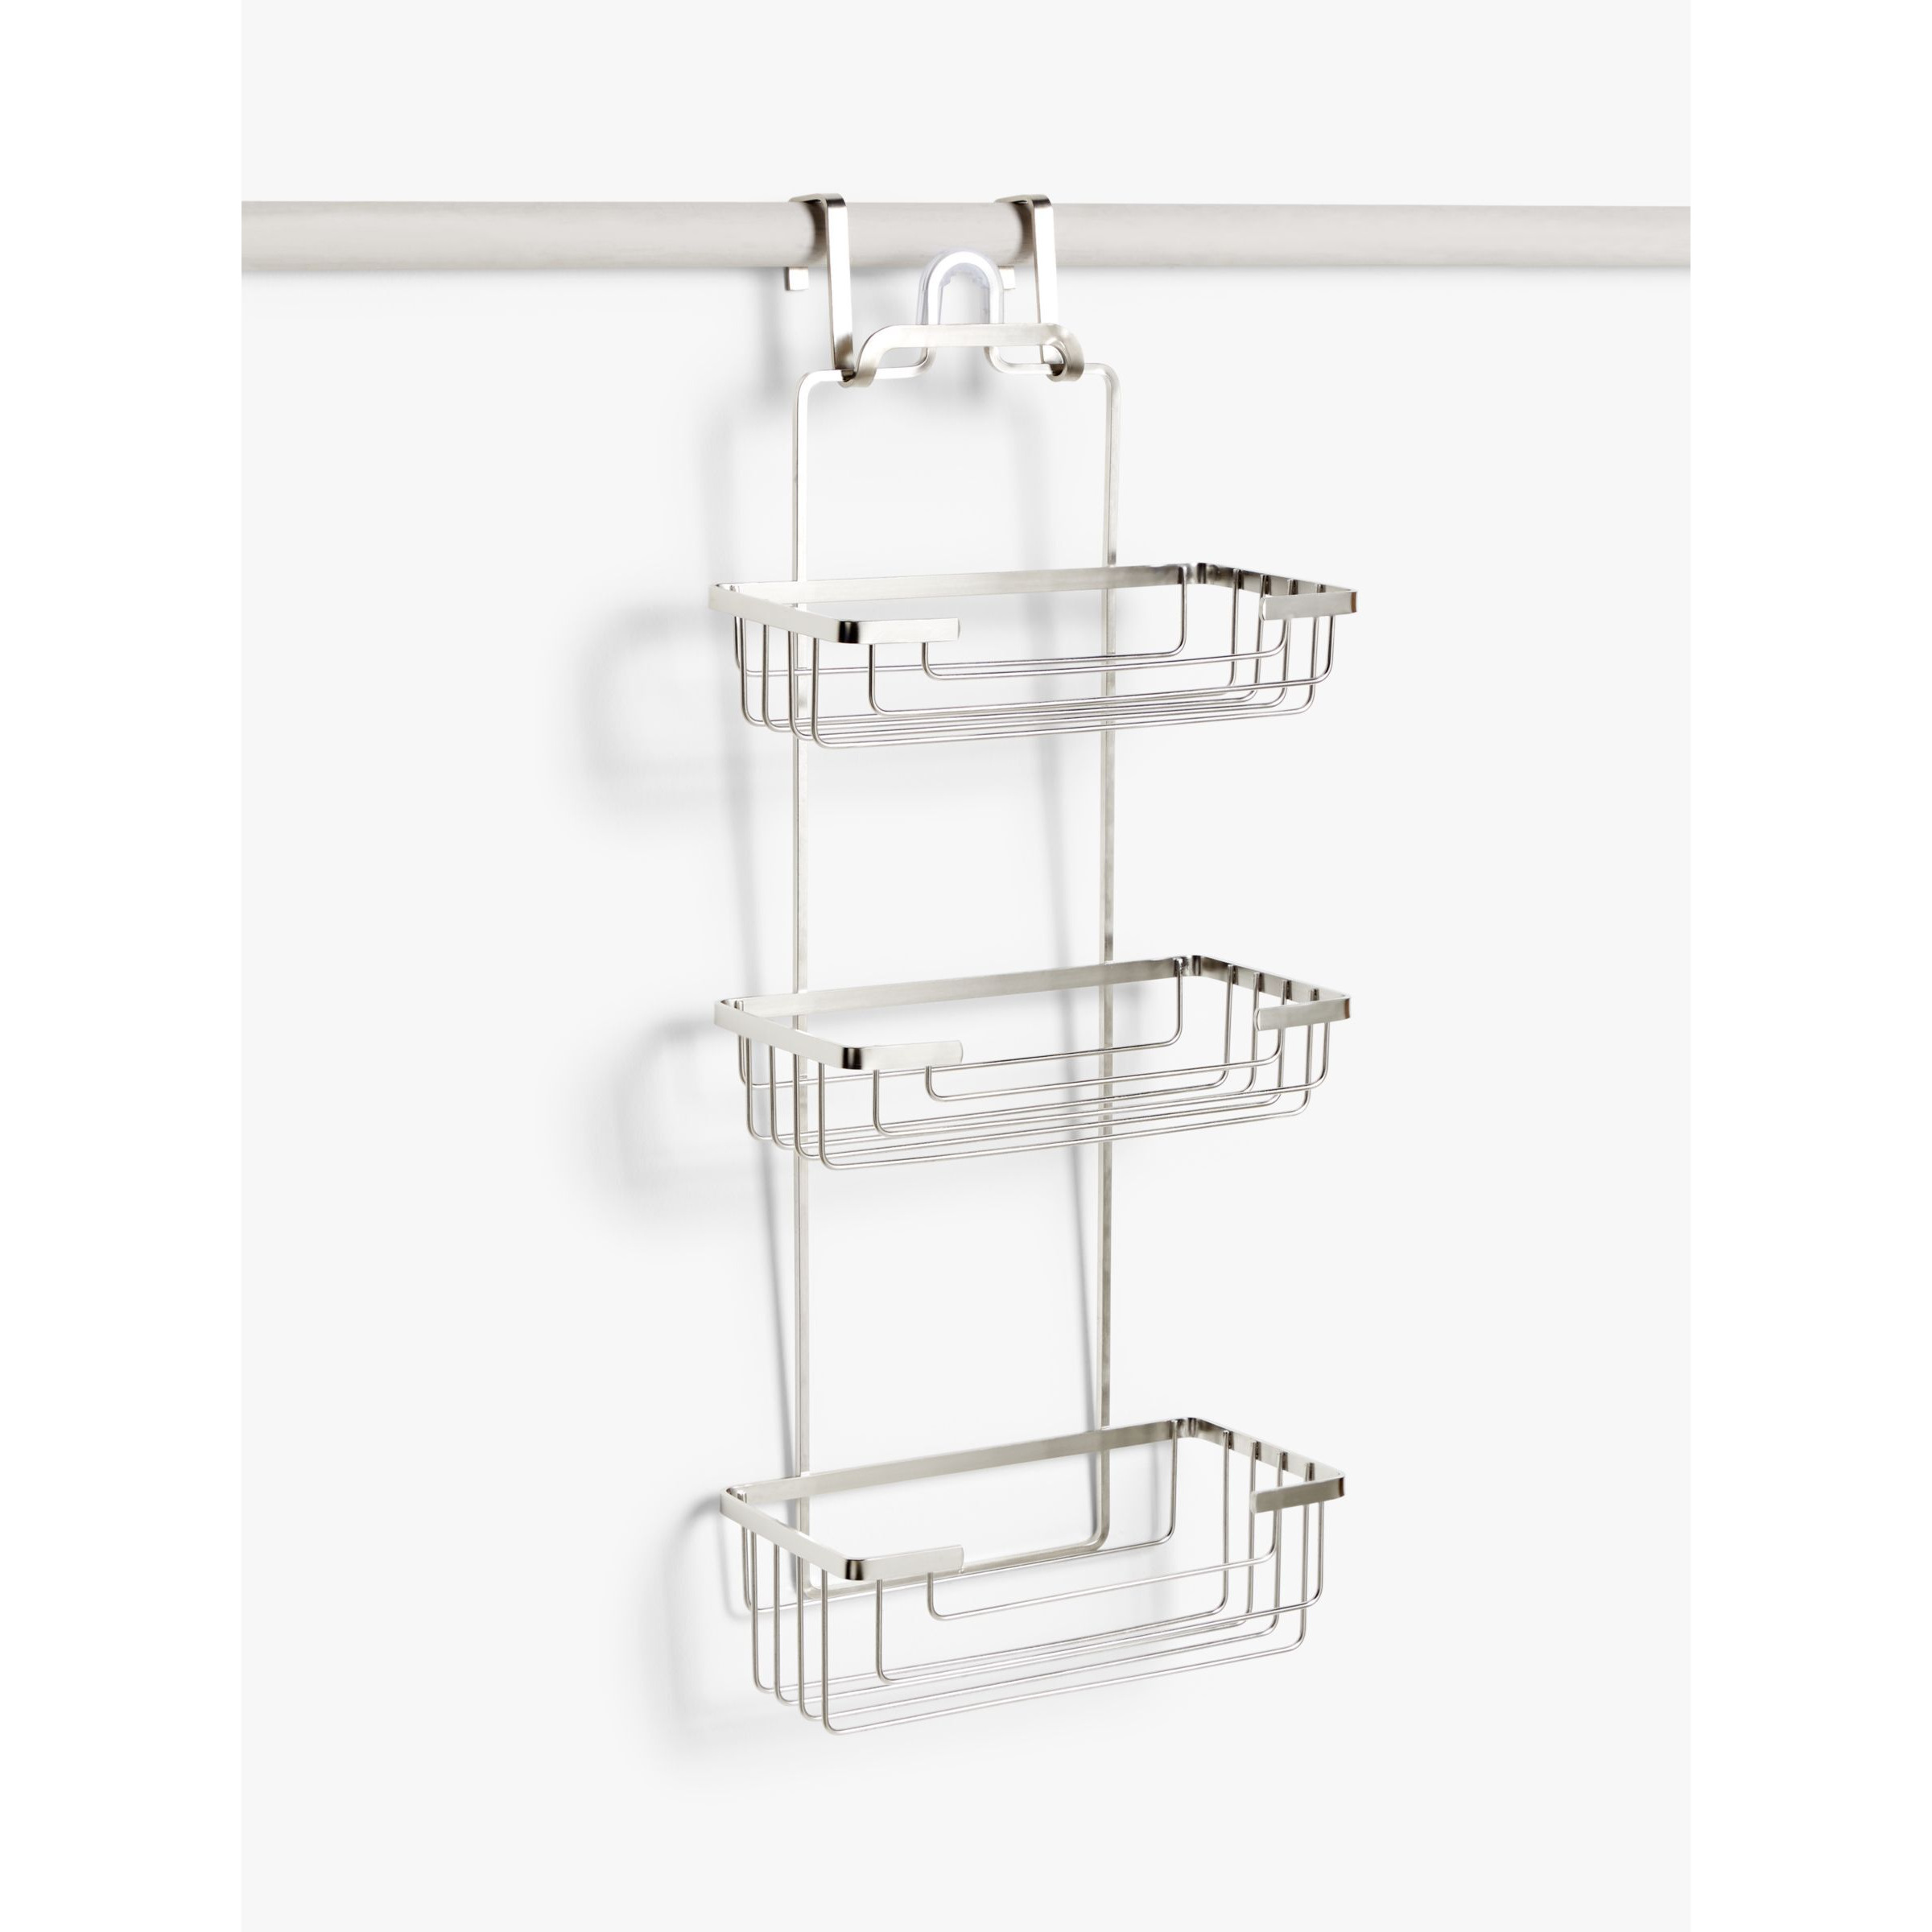 John Lewis ANYDAY Three Tier Shower Caddy - image 1